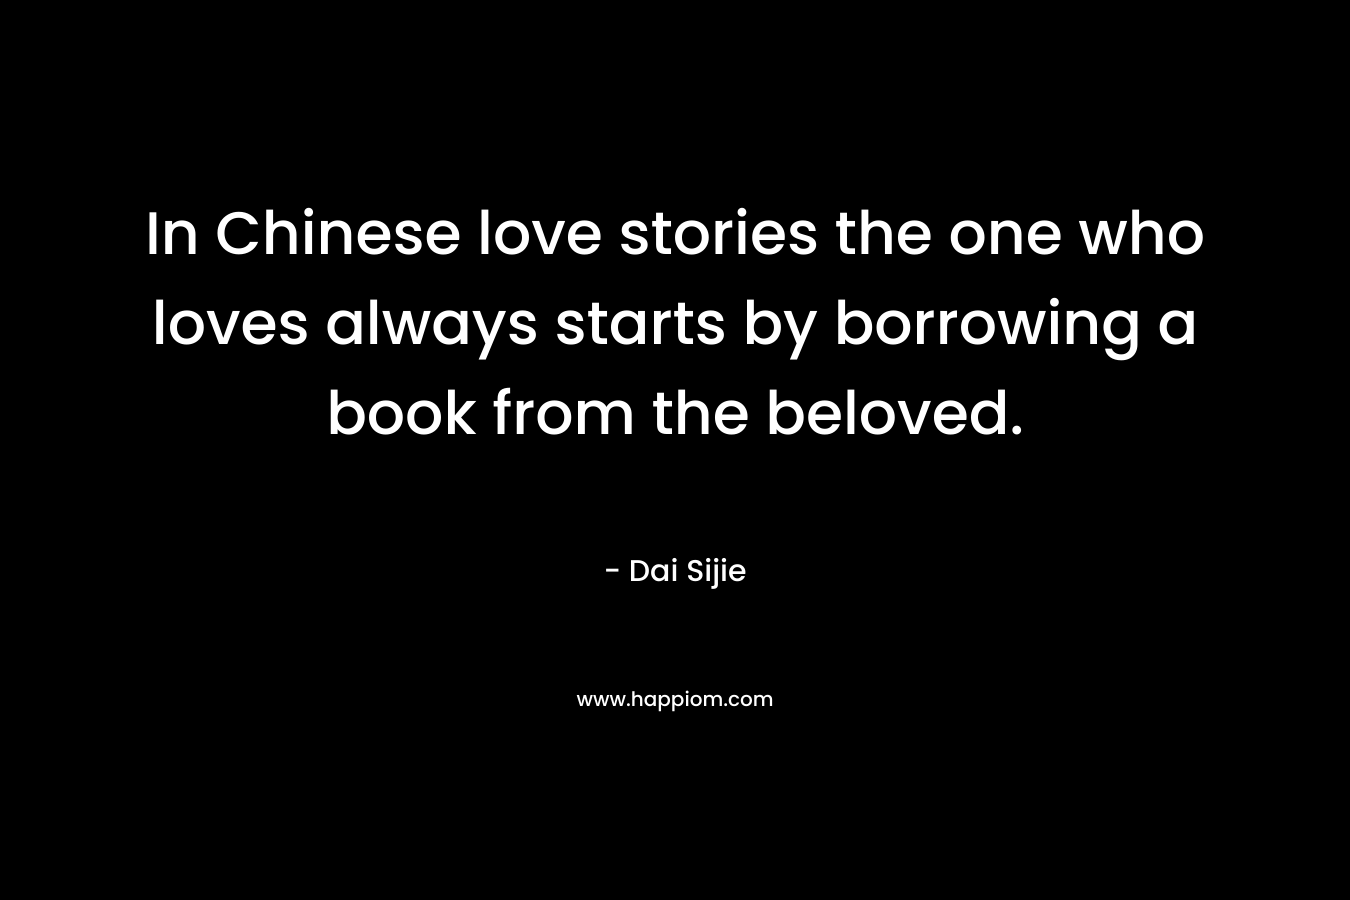 In Chinese love stories the one who loves always starts by borrowing a book from the beloved. – Dai Sijie